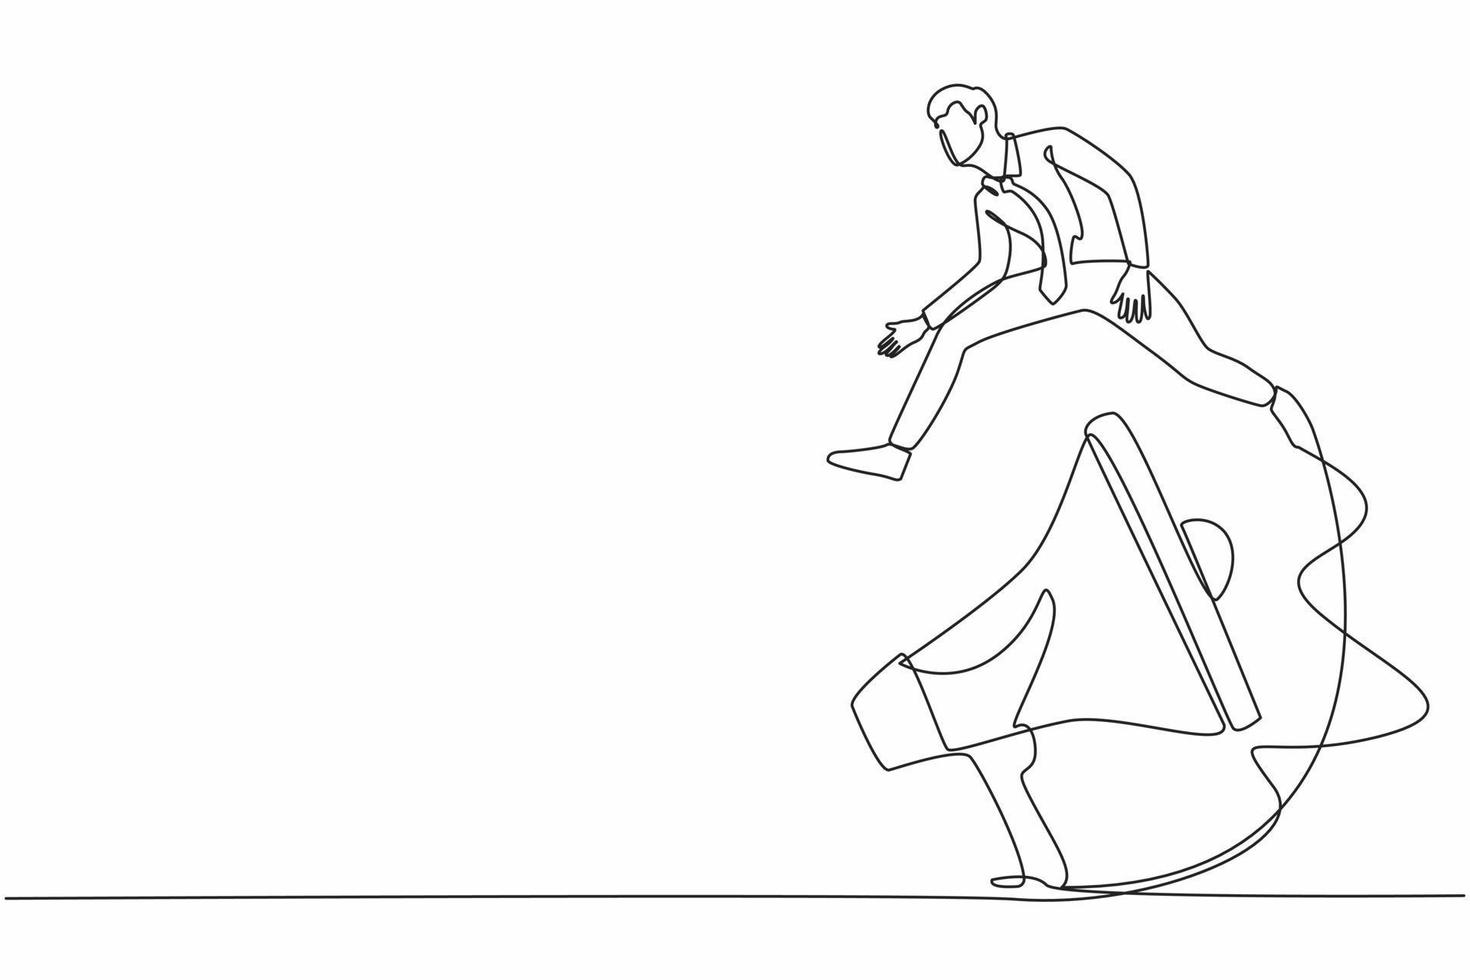 Single one line drawing businessman jumping over big megaphone. Technology for marketing. Person using speaker and giving announcement, advertising. Continuous line design graphic vector illustration